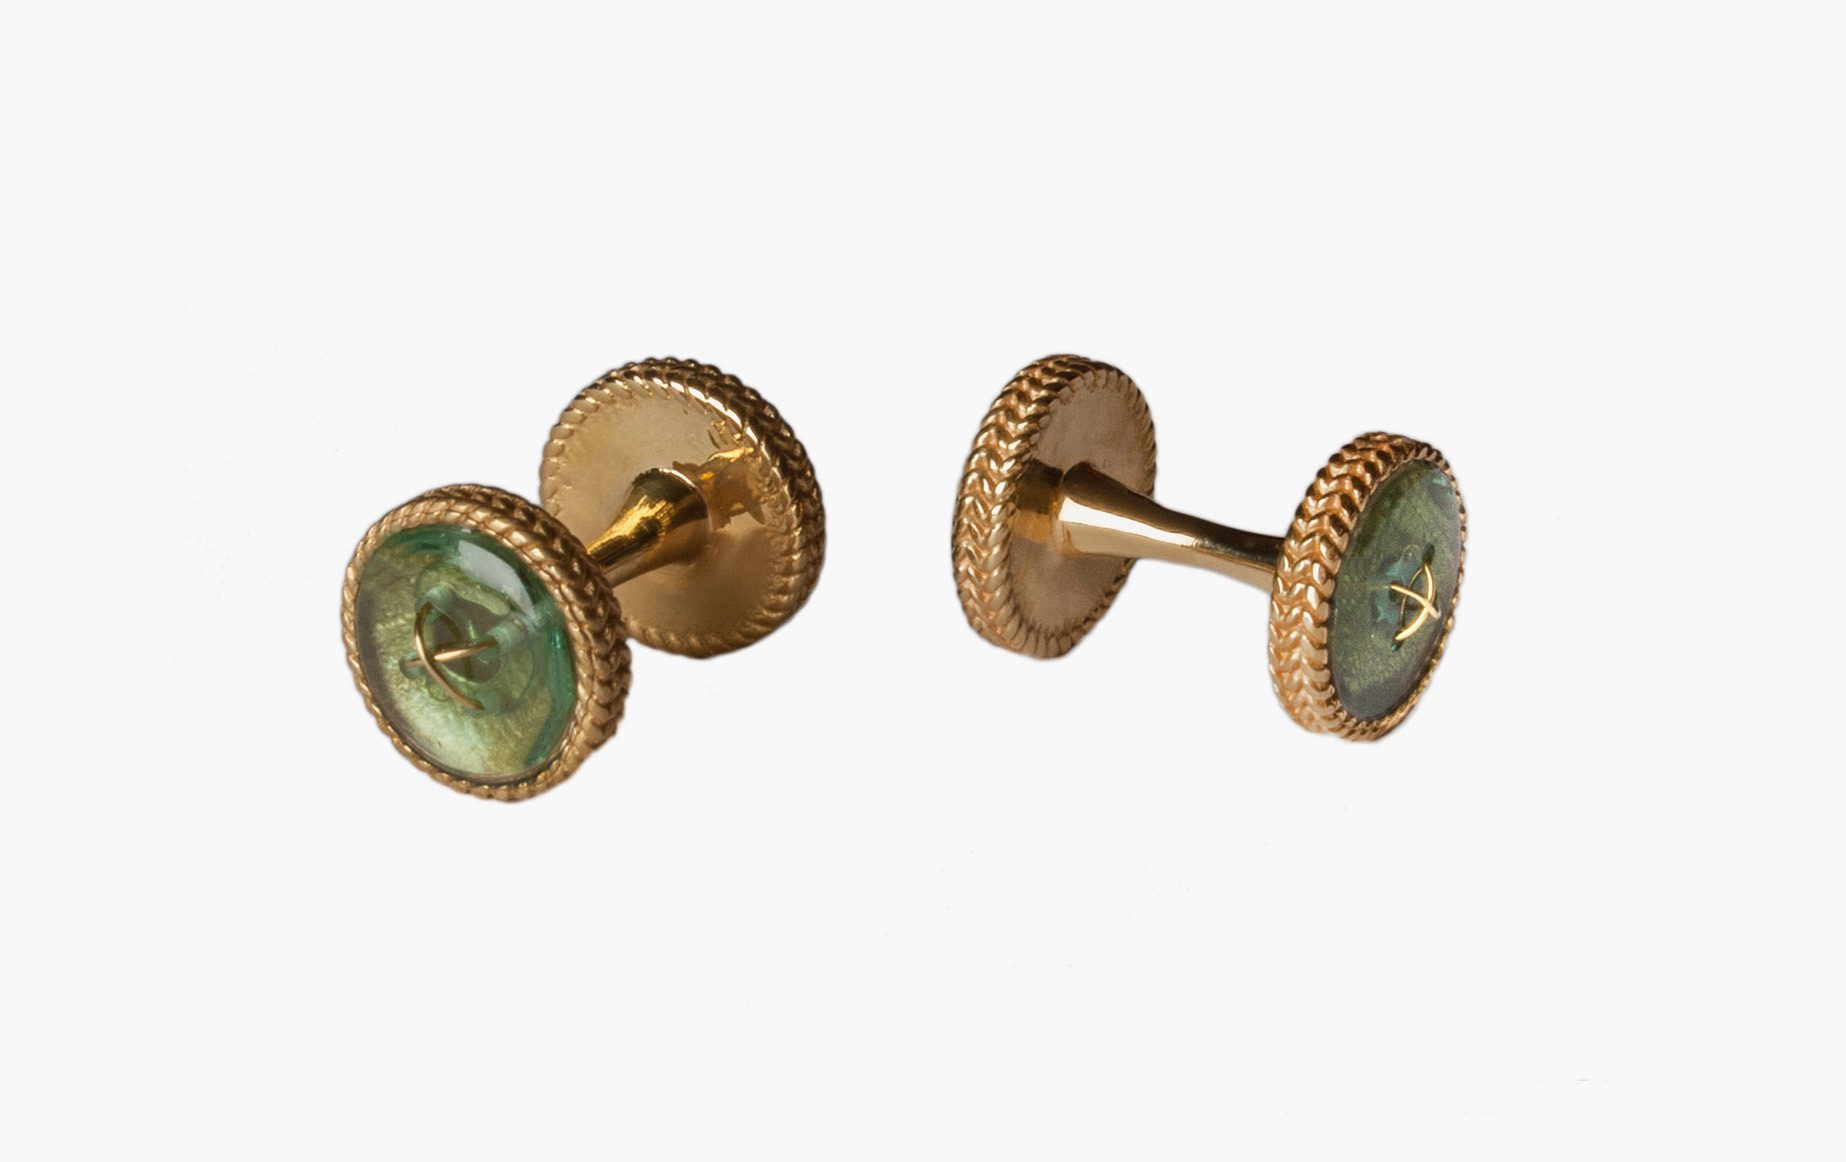 Everything You Need to Know About Cufflinks: Stud/Button Cufflink